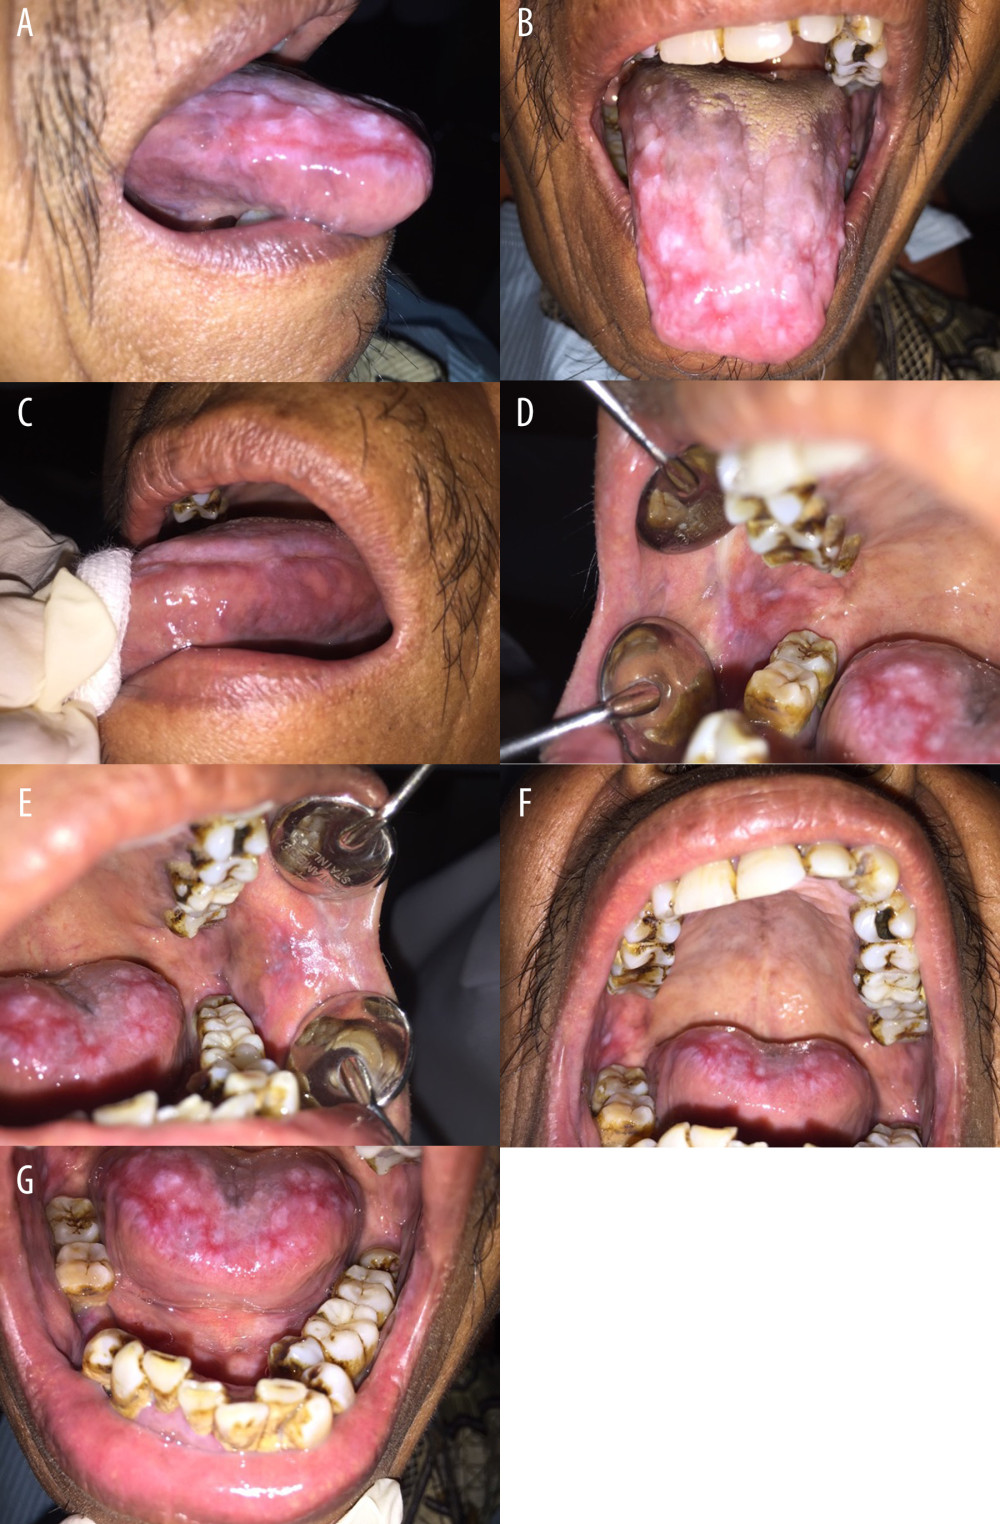 Clinical findings from the first visit. Erosion and erythematous areas surrounded by Wickham’s striae were found on the dorsal and lateral of the tongue and buccal mucosa (A–E). We also found that the dorsal anterior of the tongue was depapillated and stiff on palpation (A–C). Thick plaque, calculus, and stains were visible on the upper and lower teeth (F, G).